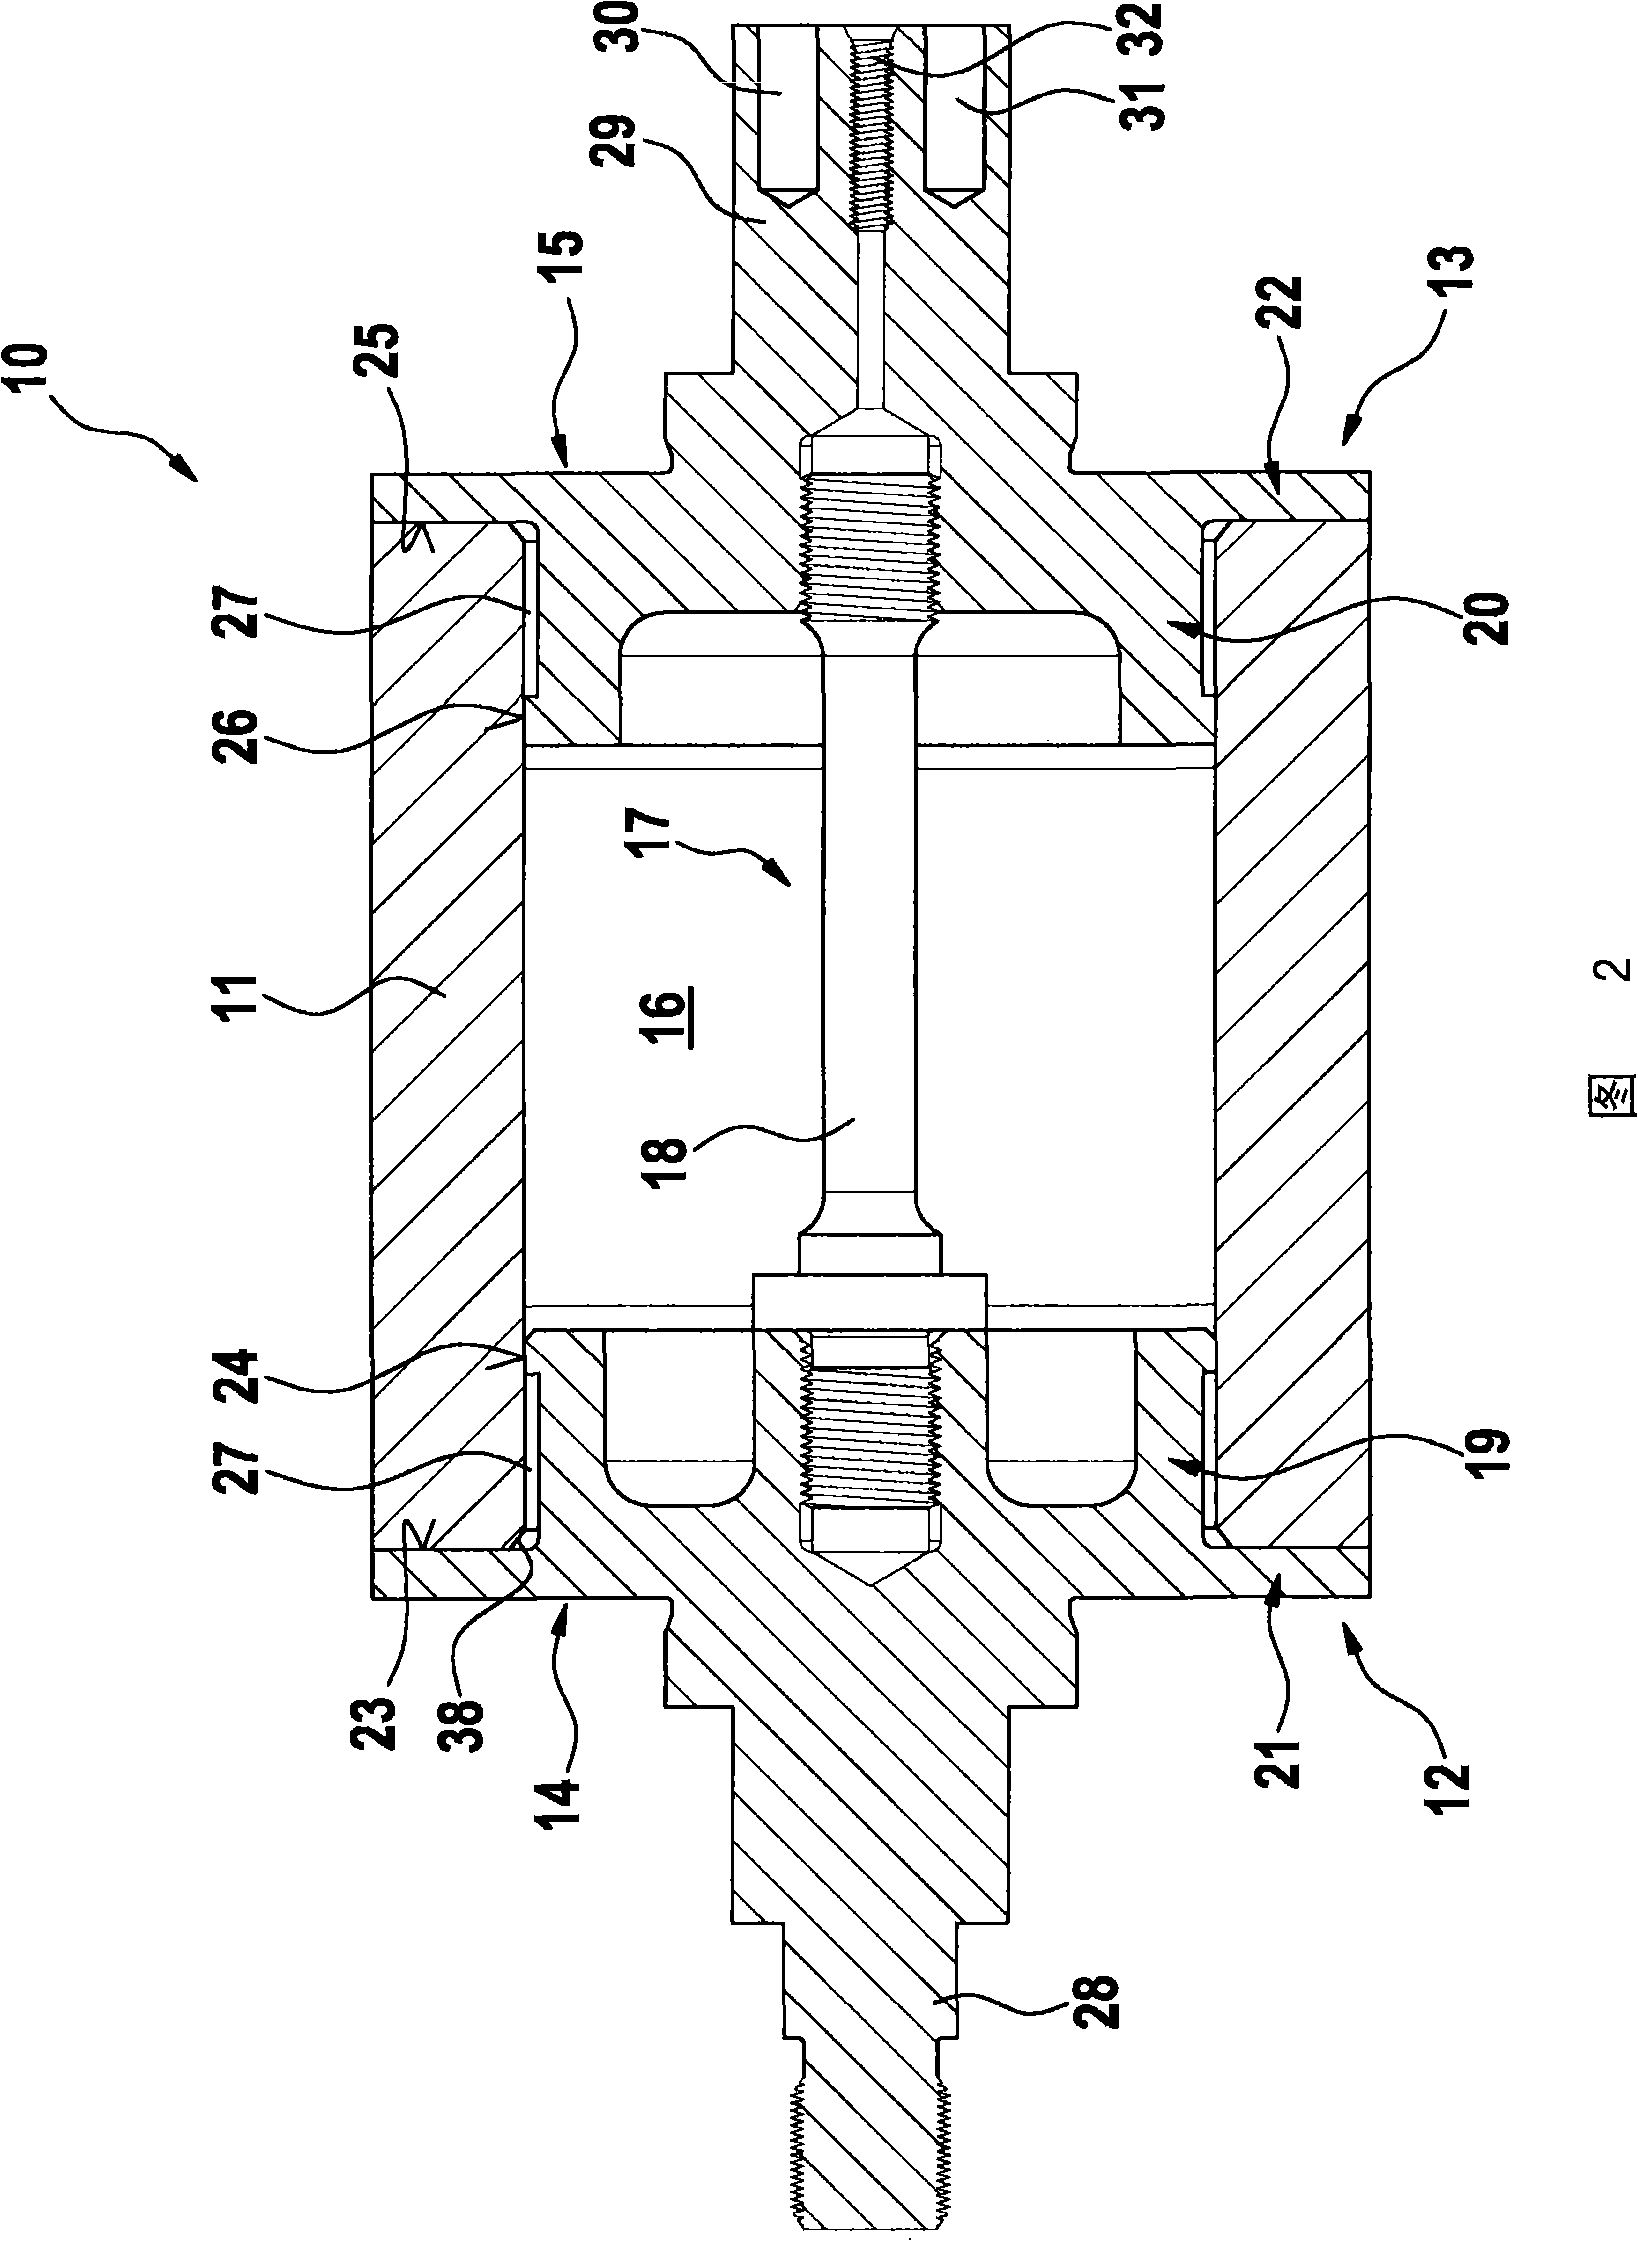 Roller for taking up and/or transferring glue in devices of the tobacco processing industry